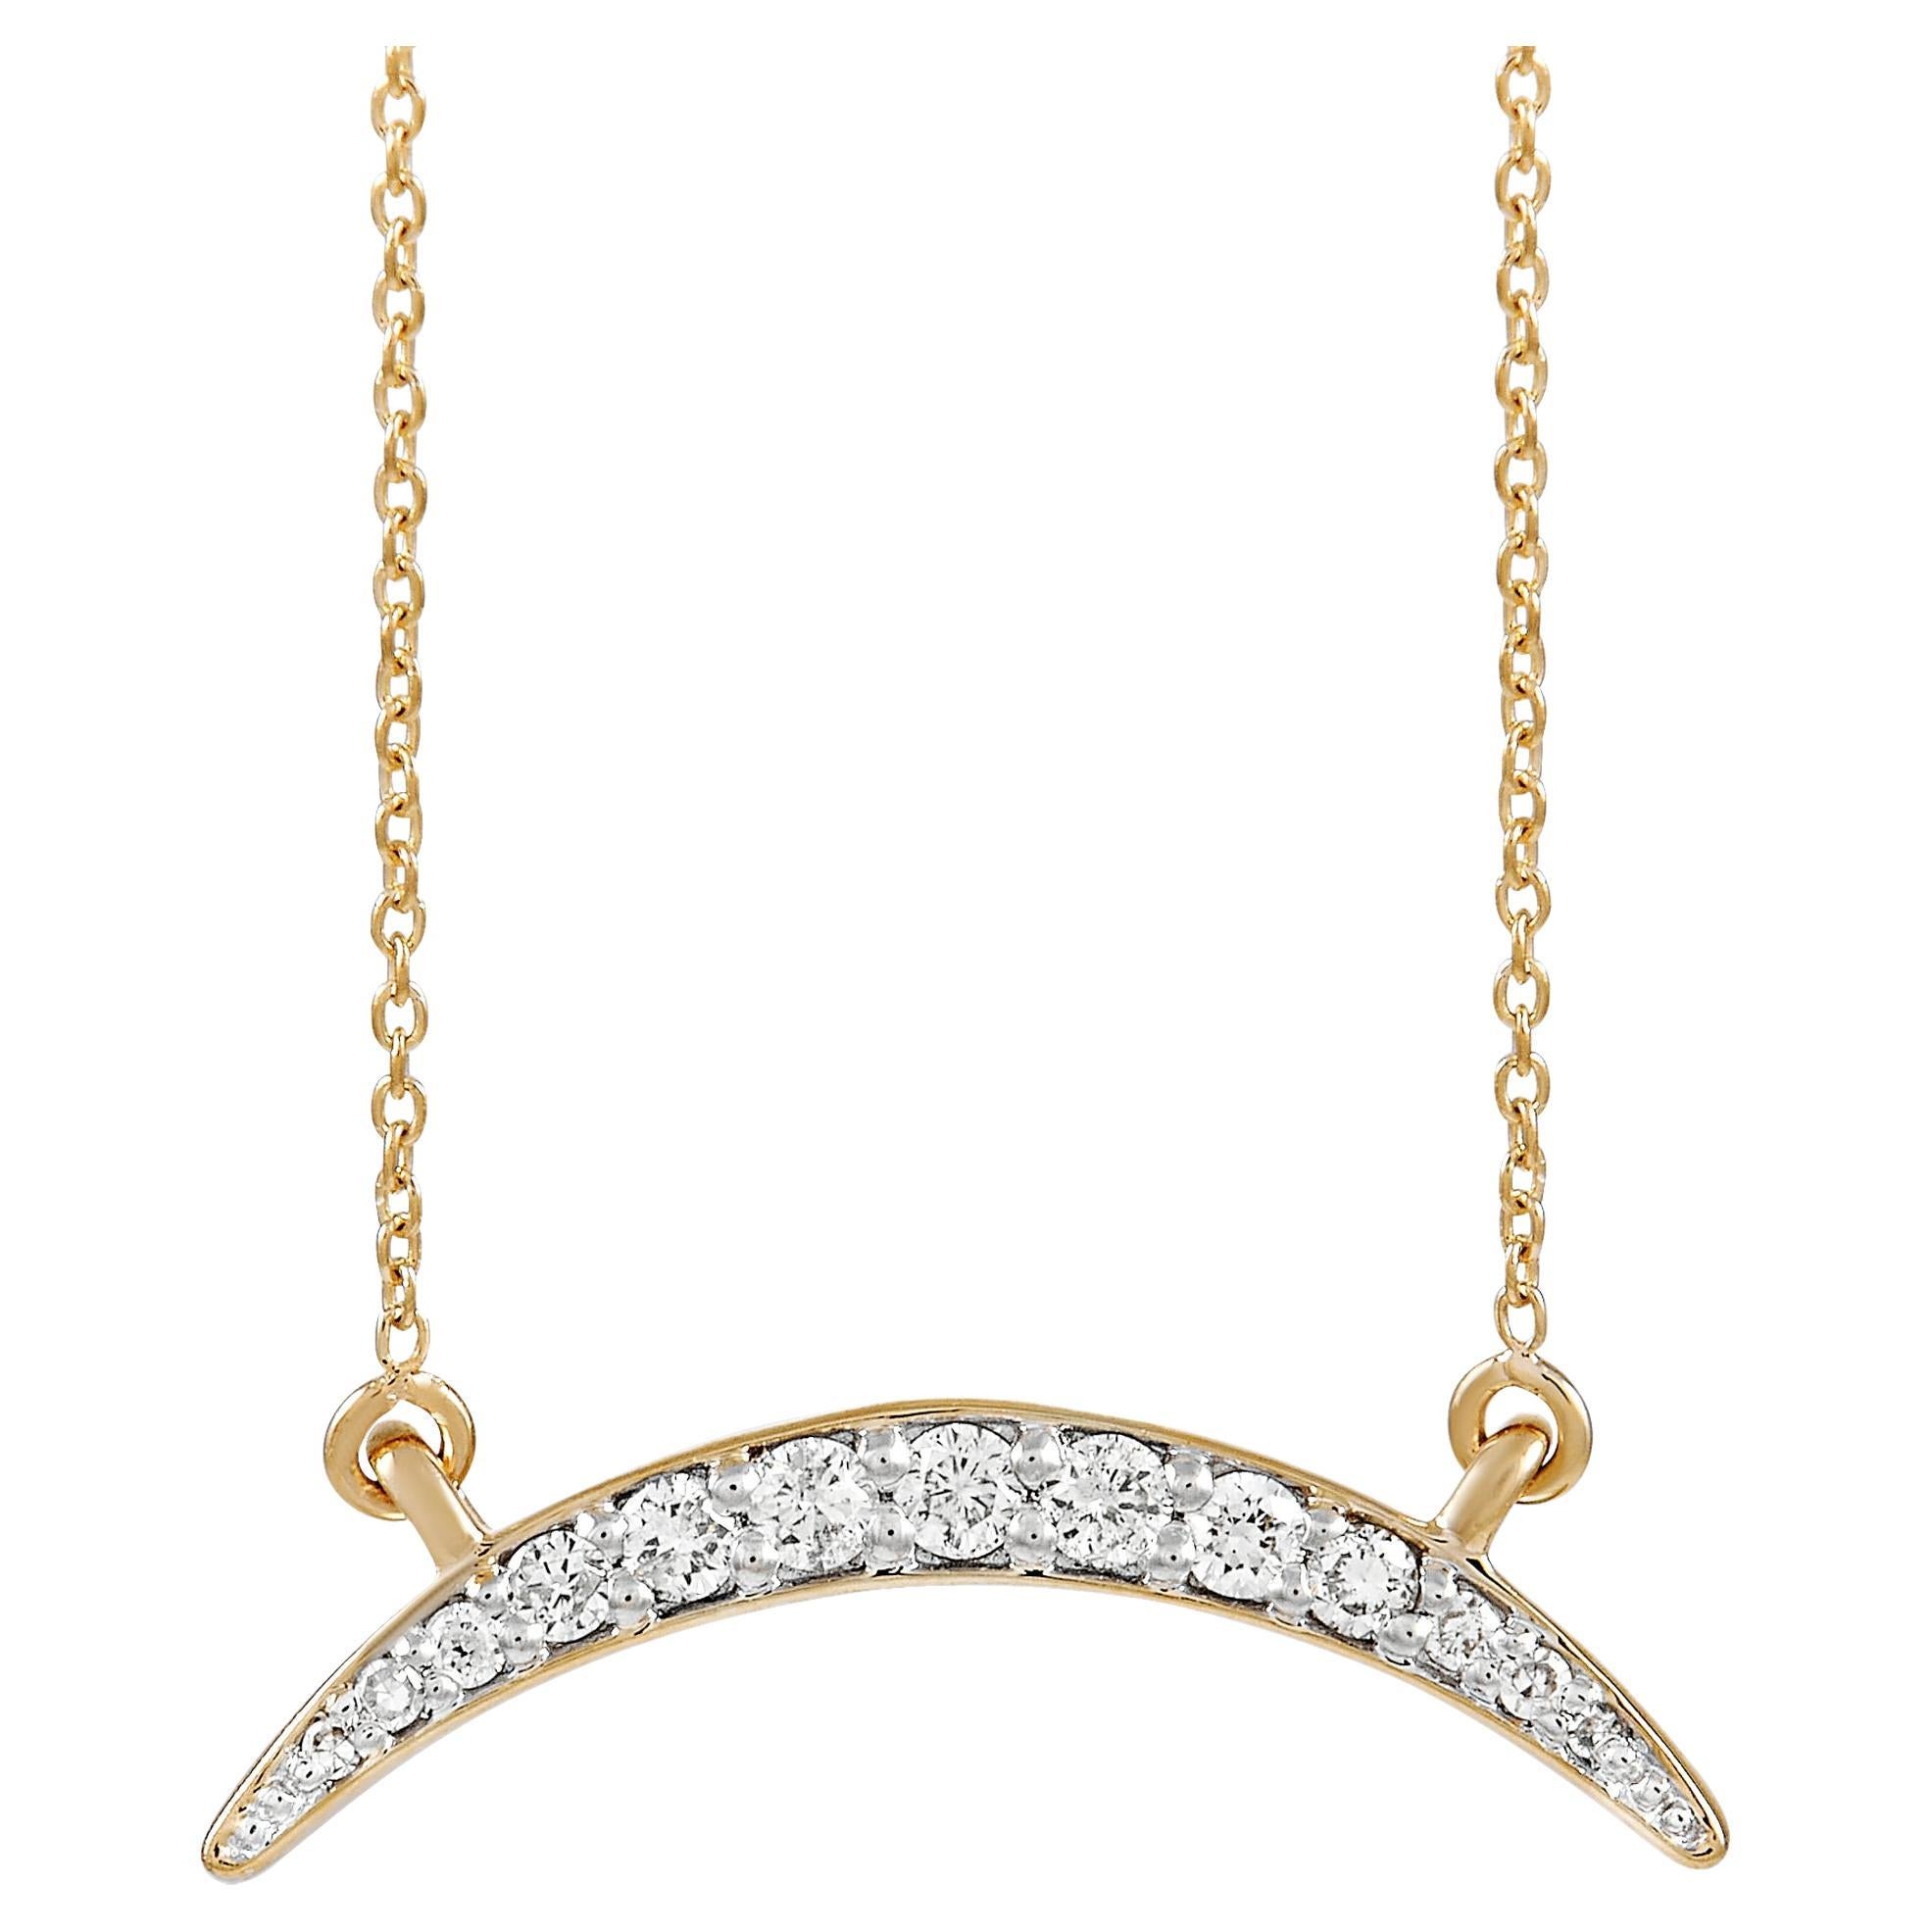 LB Exclusive 14K Yellow Gold 0.16 Ct Diamond Necklace